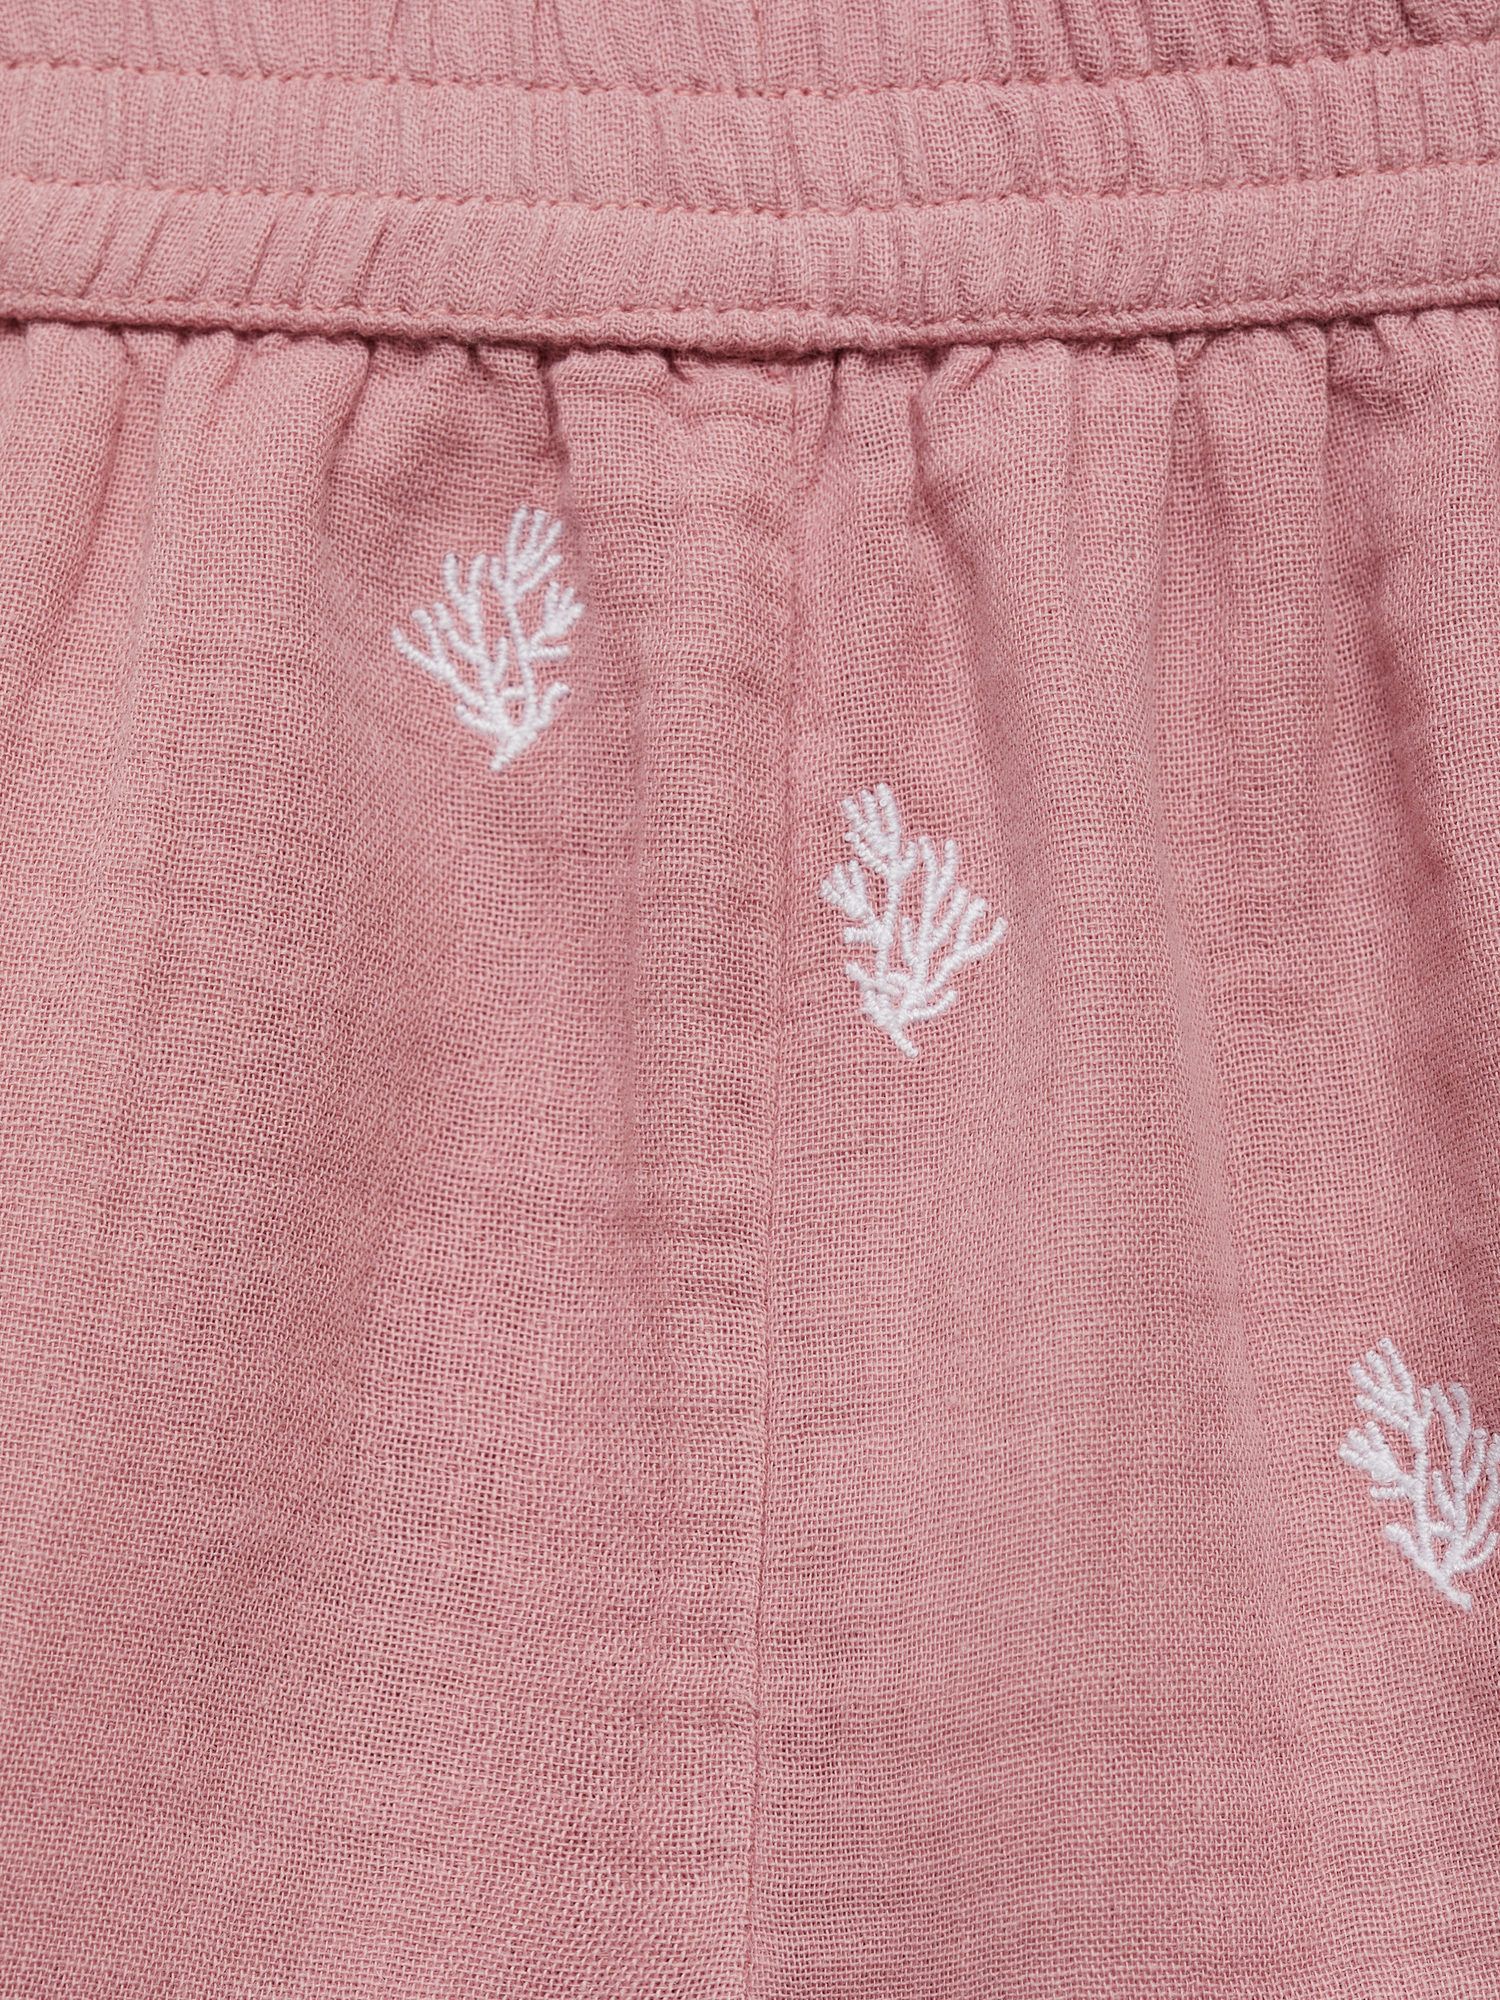 Mango Baby Nemo Embroidered Shorts, Pink, 12-18 months